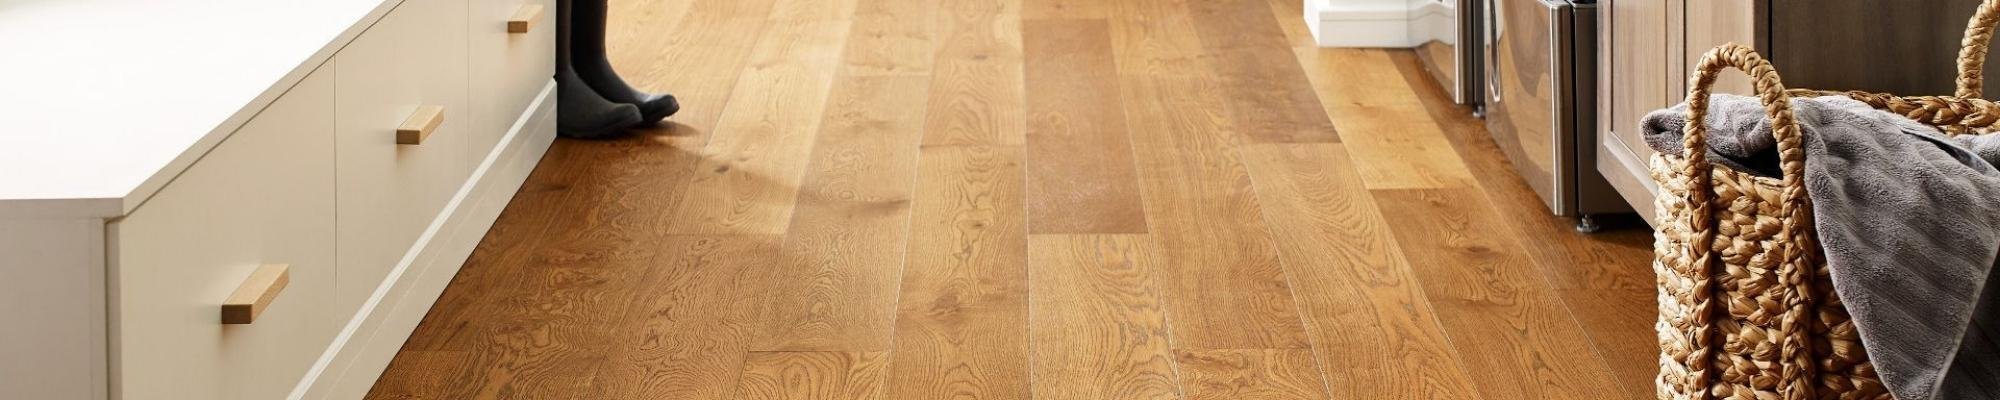 Hardwood Flooring from The Carpet and Drapery Shoppe in Escanaba